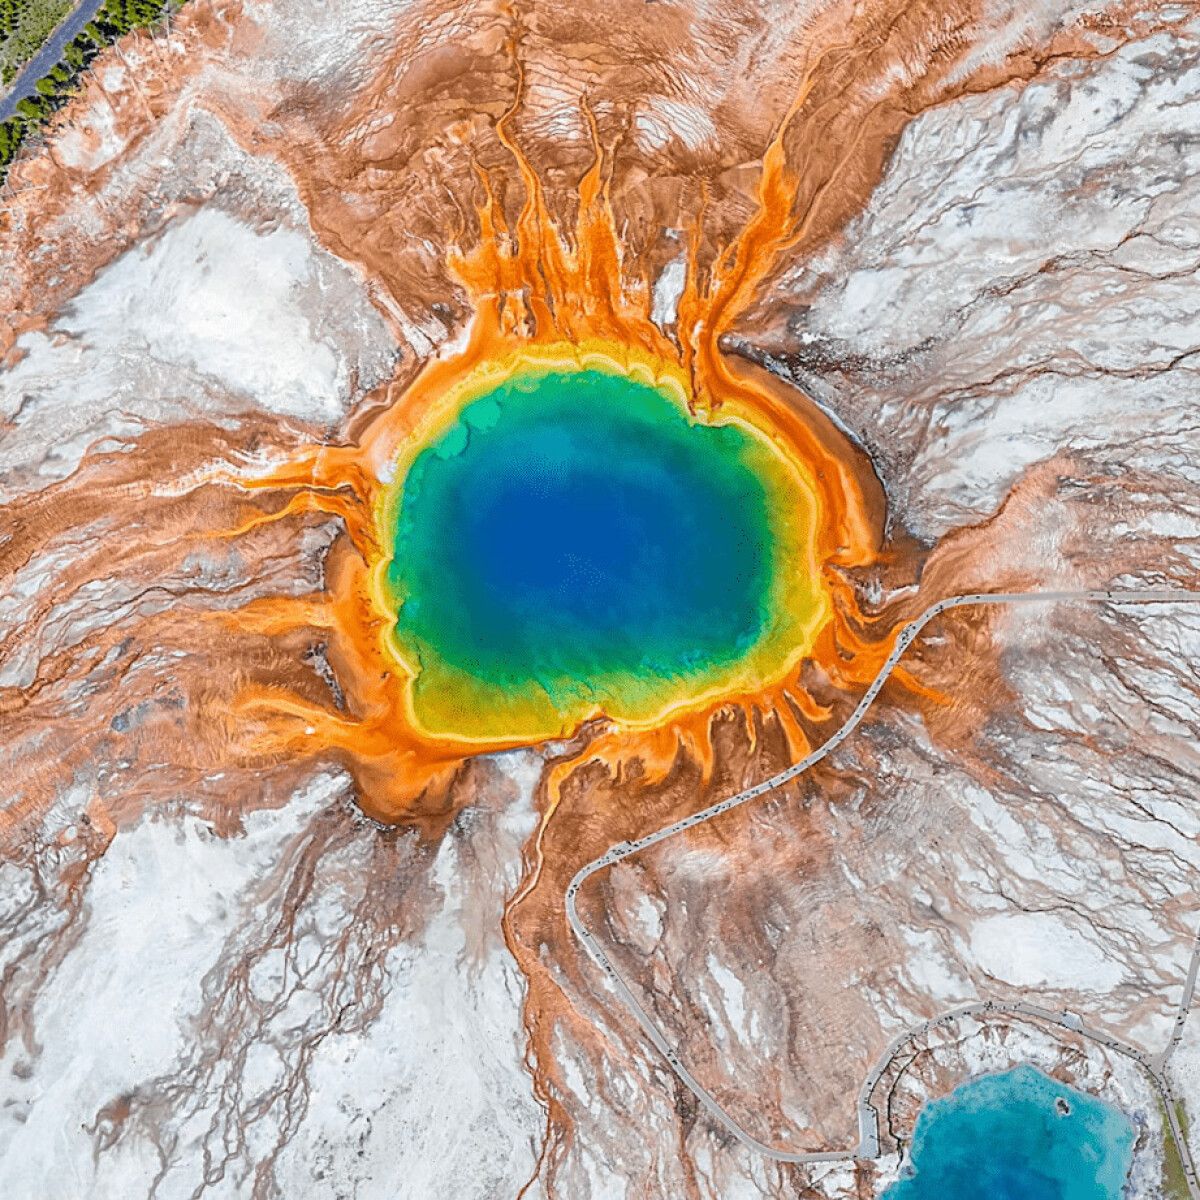 Aerial view of the Grand Prismatic Spring in Yellowstone National Park, showing the vivid colors of the thermal pool and surrounding landscape. - Earth